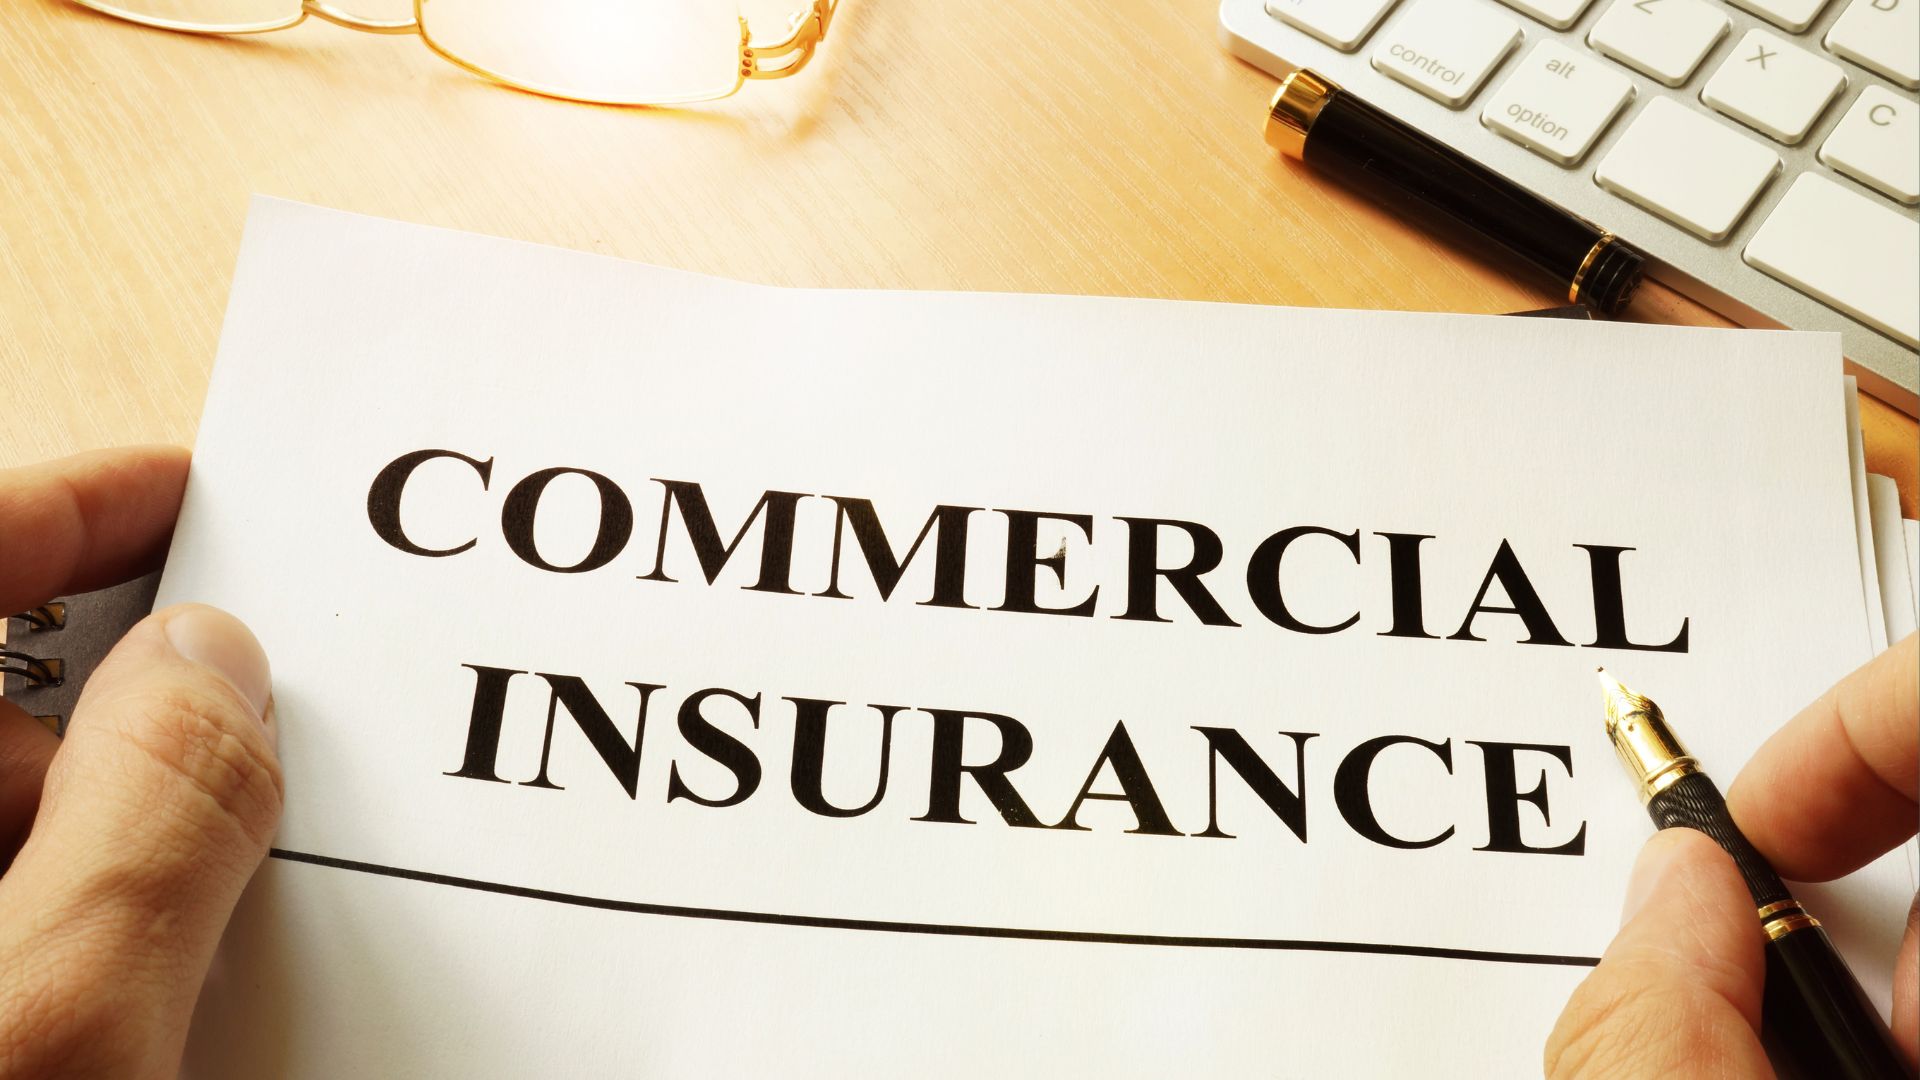 The Significance of Commercial Insurance